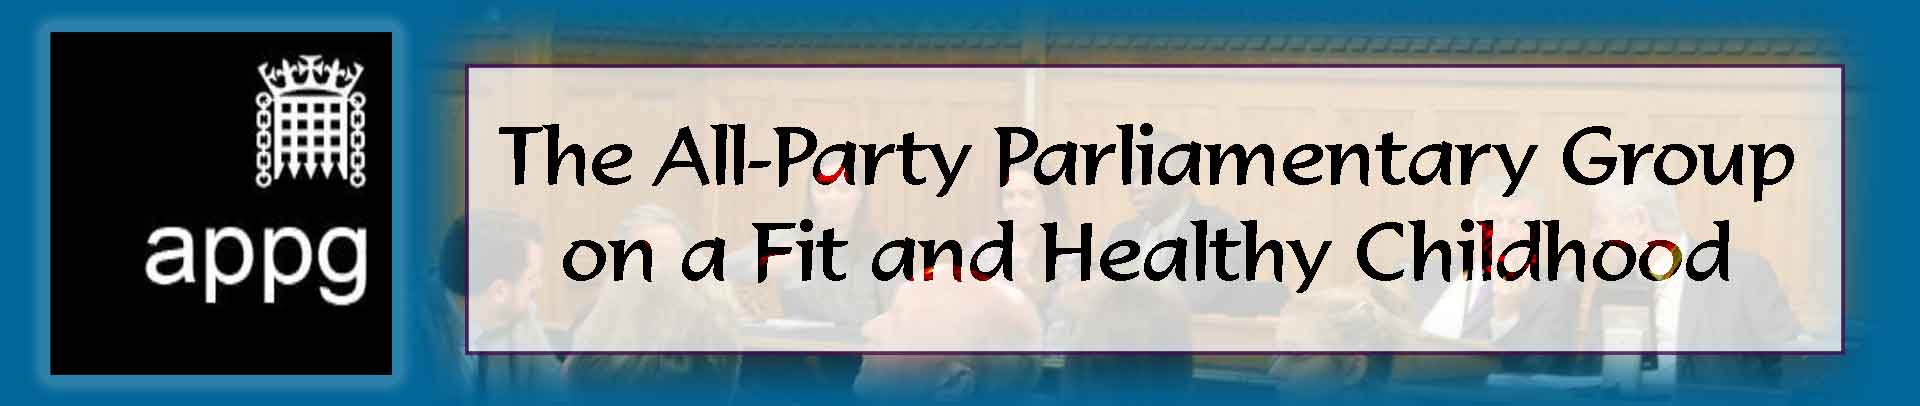 The All-Party Parliamentary Group on a Fit and Healthy Childhood